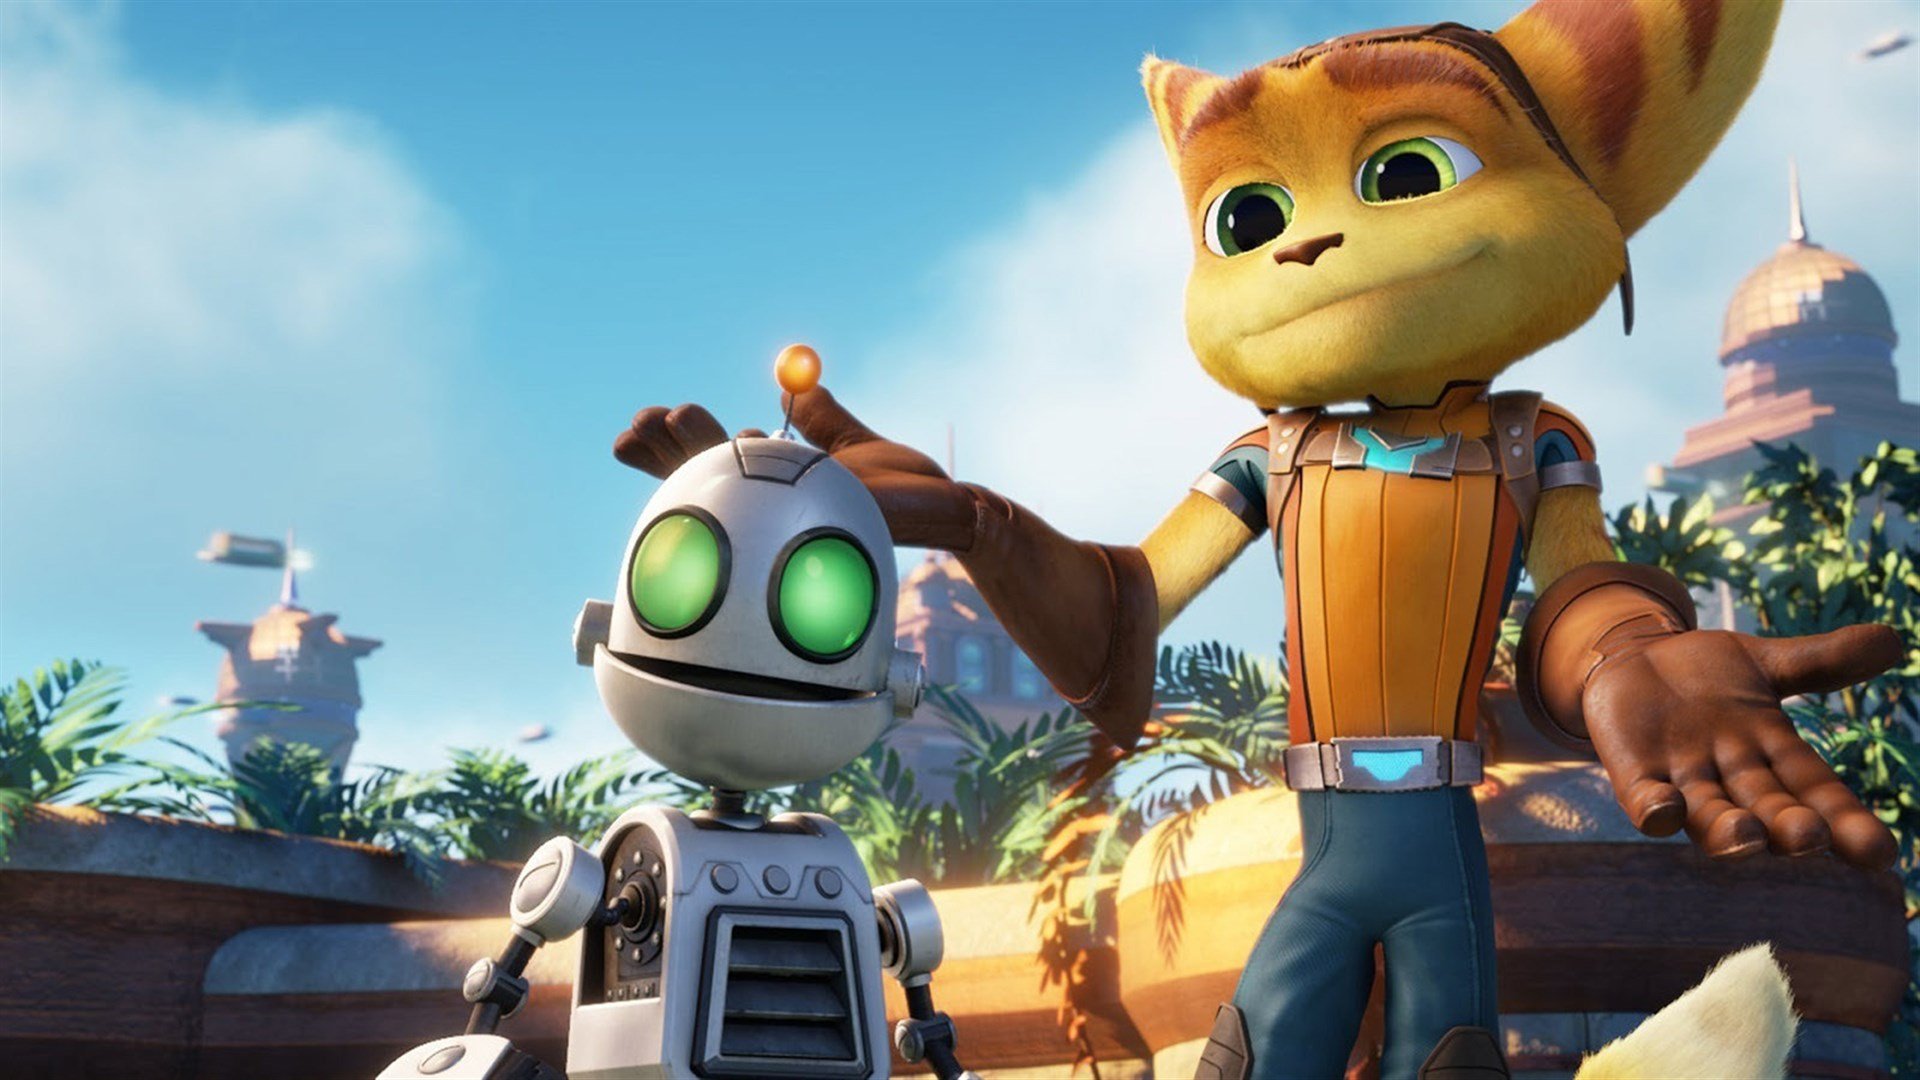 Ratchet & Clank Game Reportedly Headed To PS5 As A Launch Title